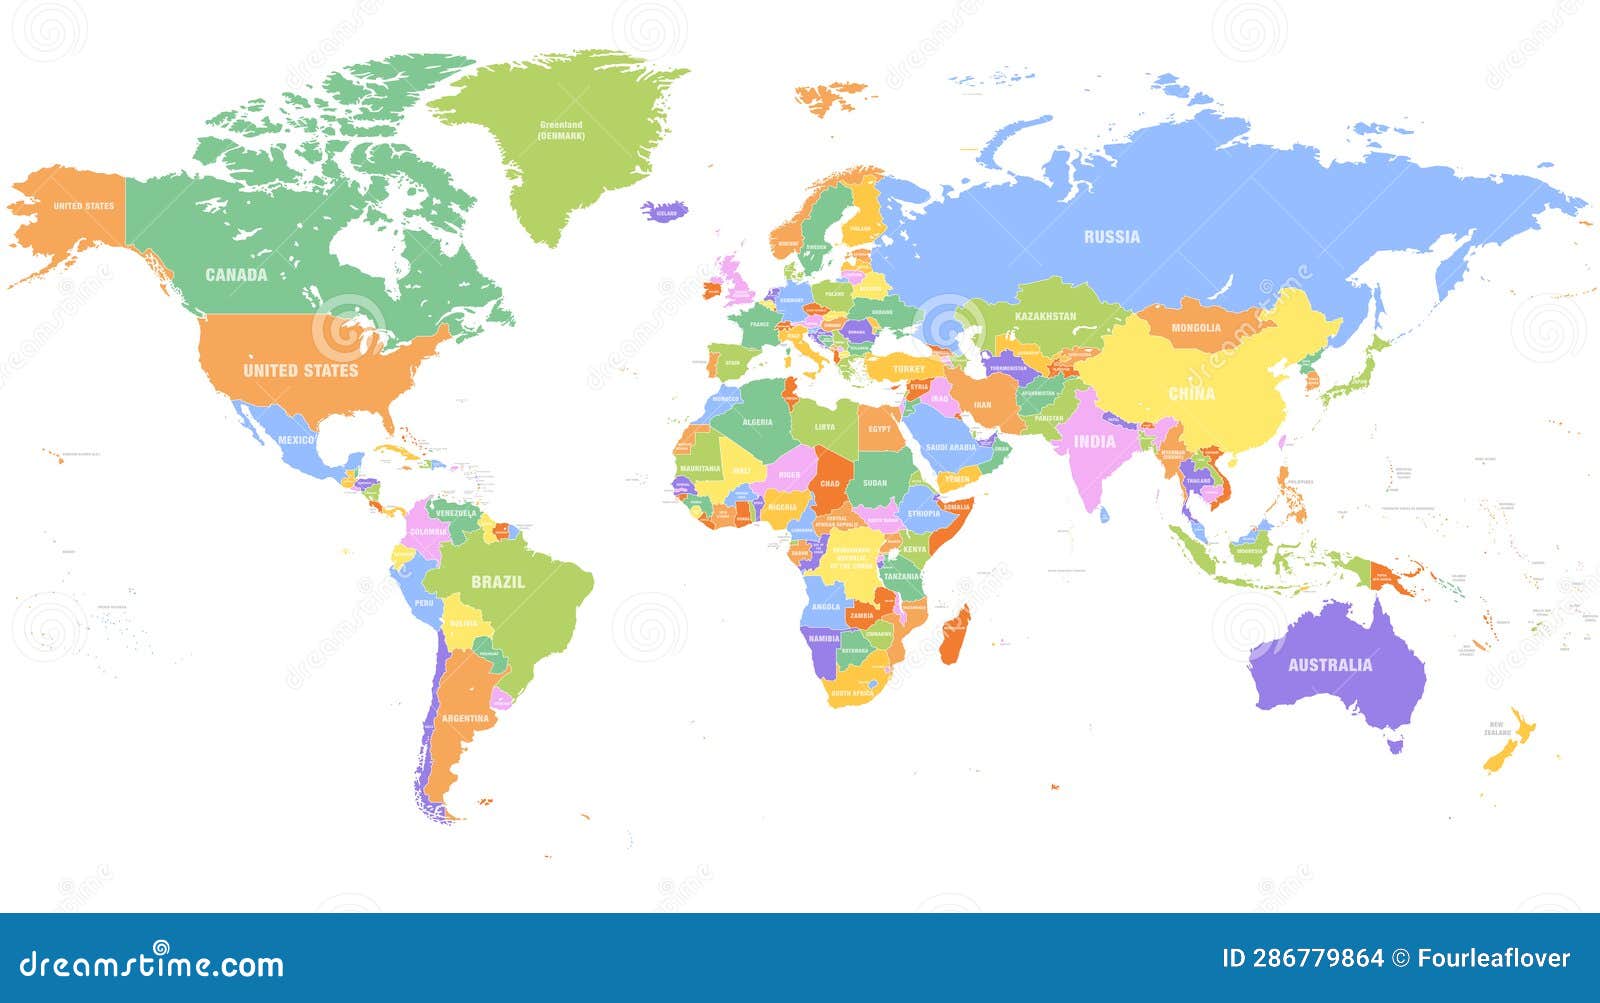 Colored World Map Political Maps Colourful World Countries And